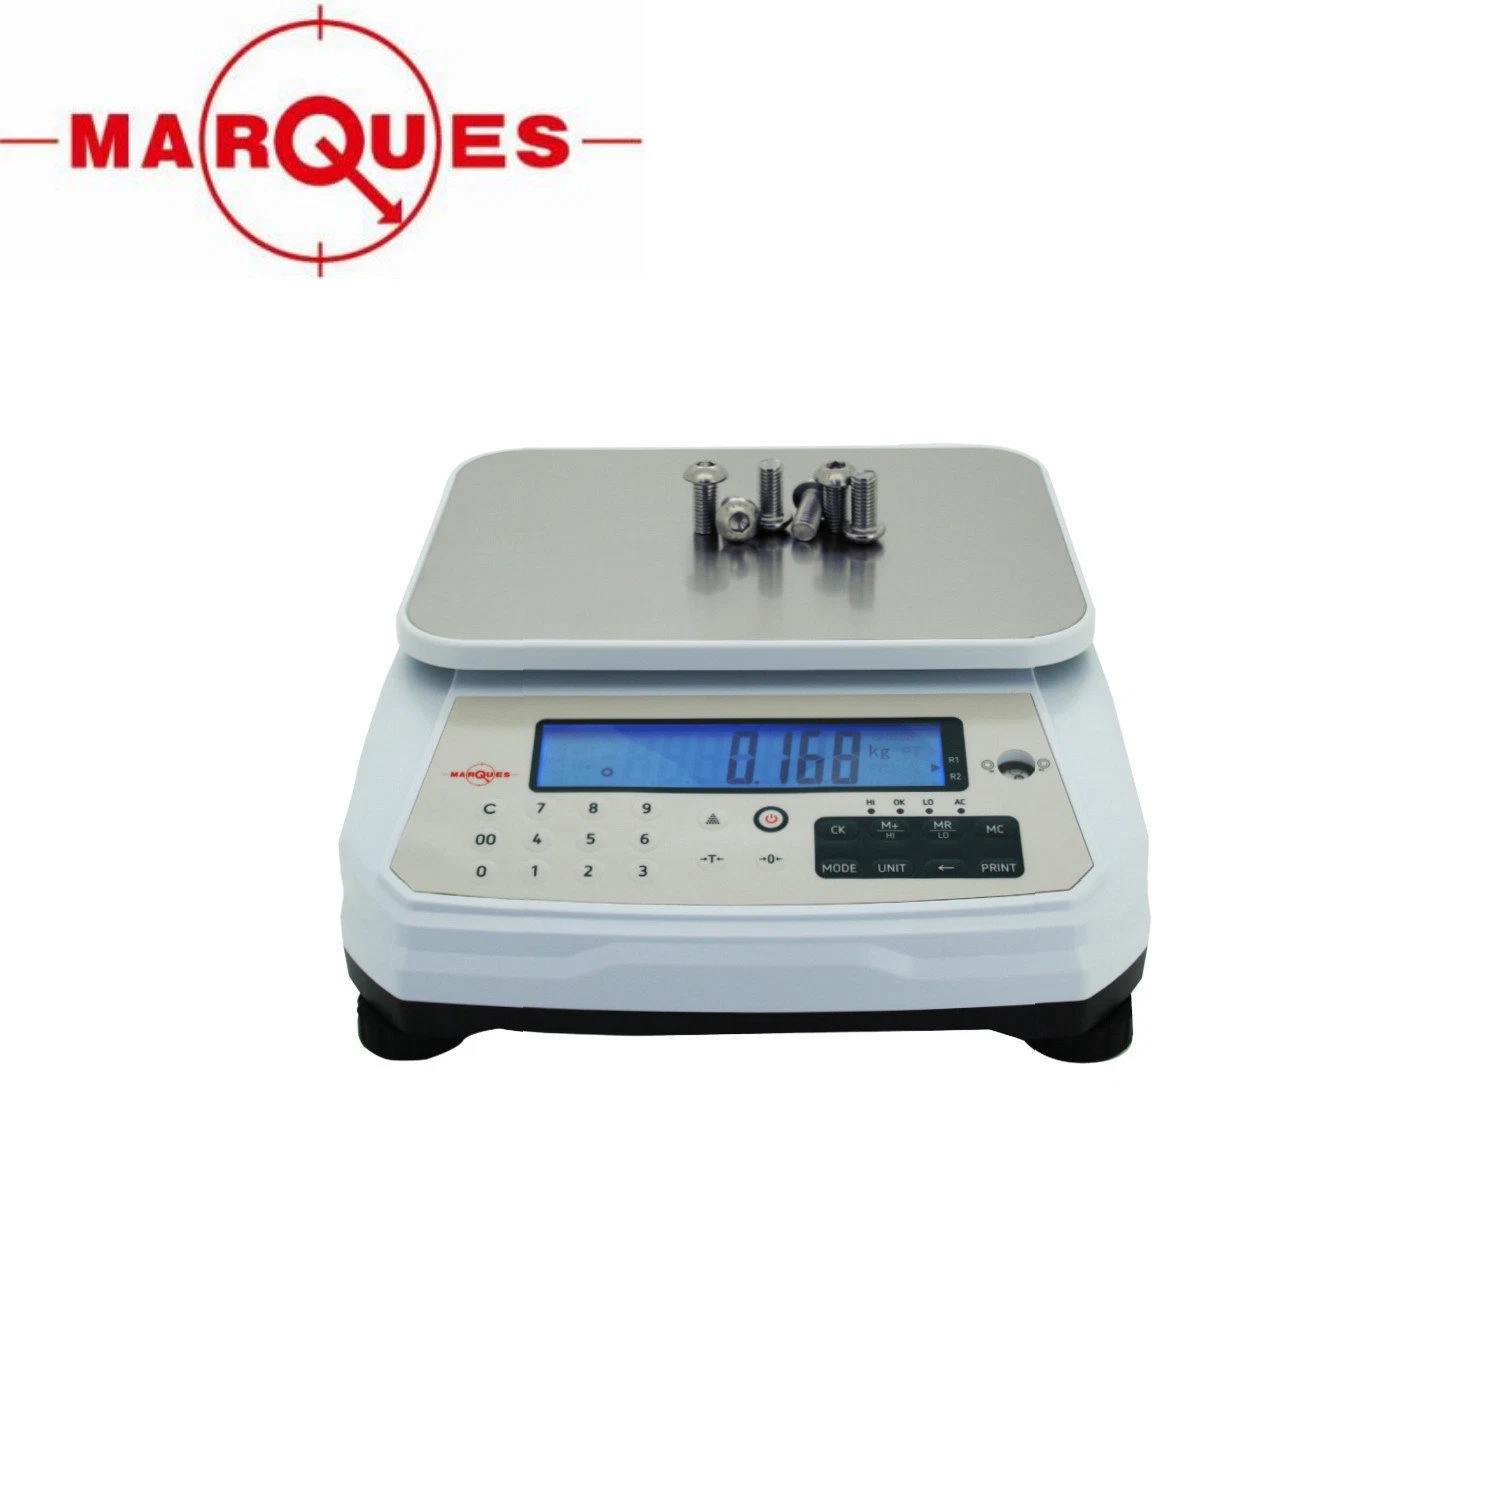 Stainless Steel Electronic Portable Weighing Balance with Large LCD Screen Display